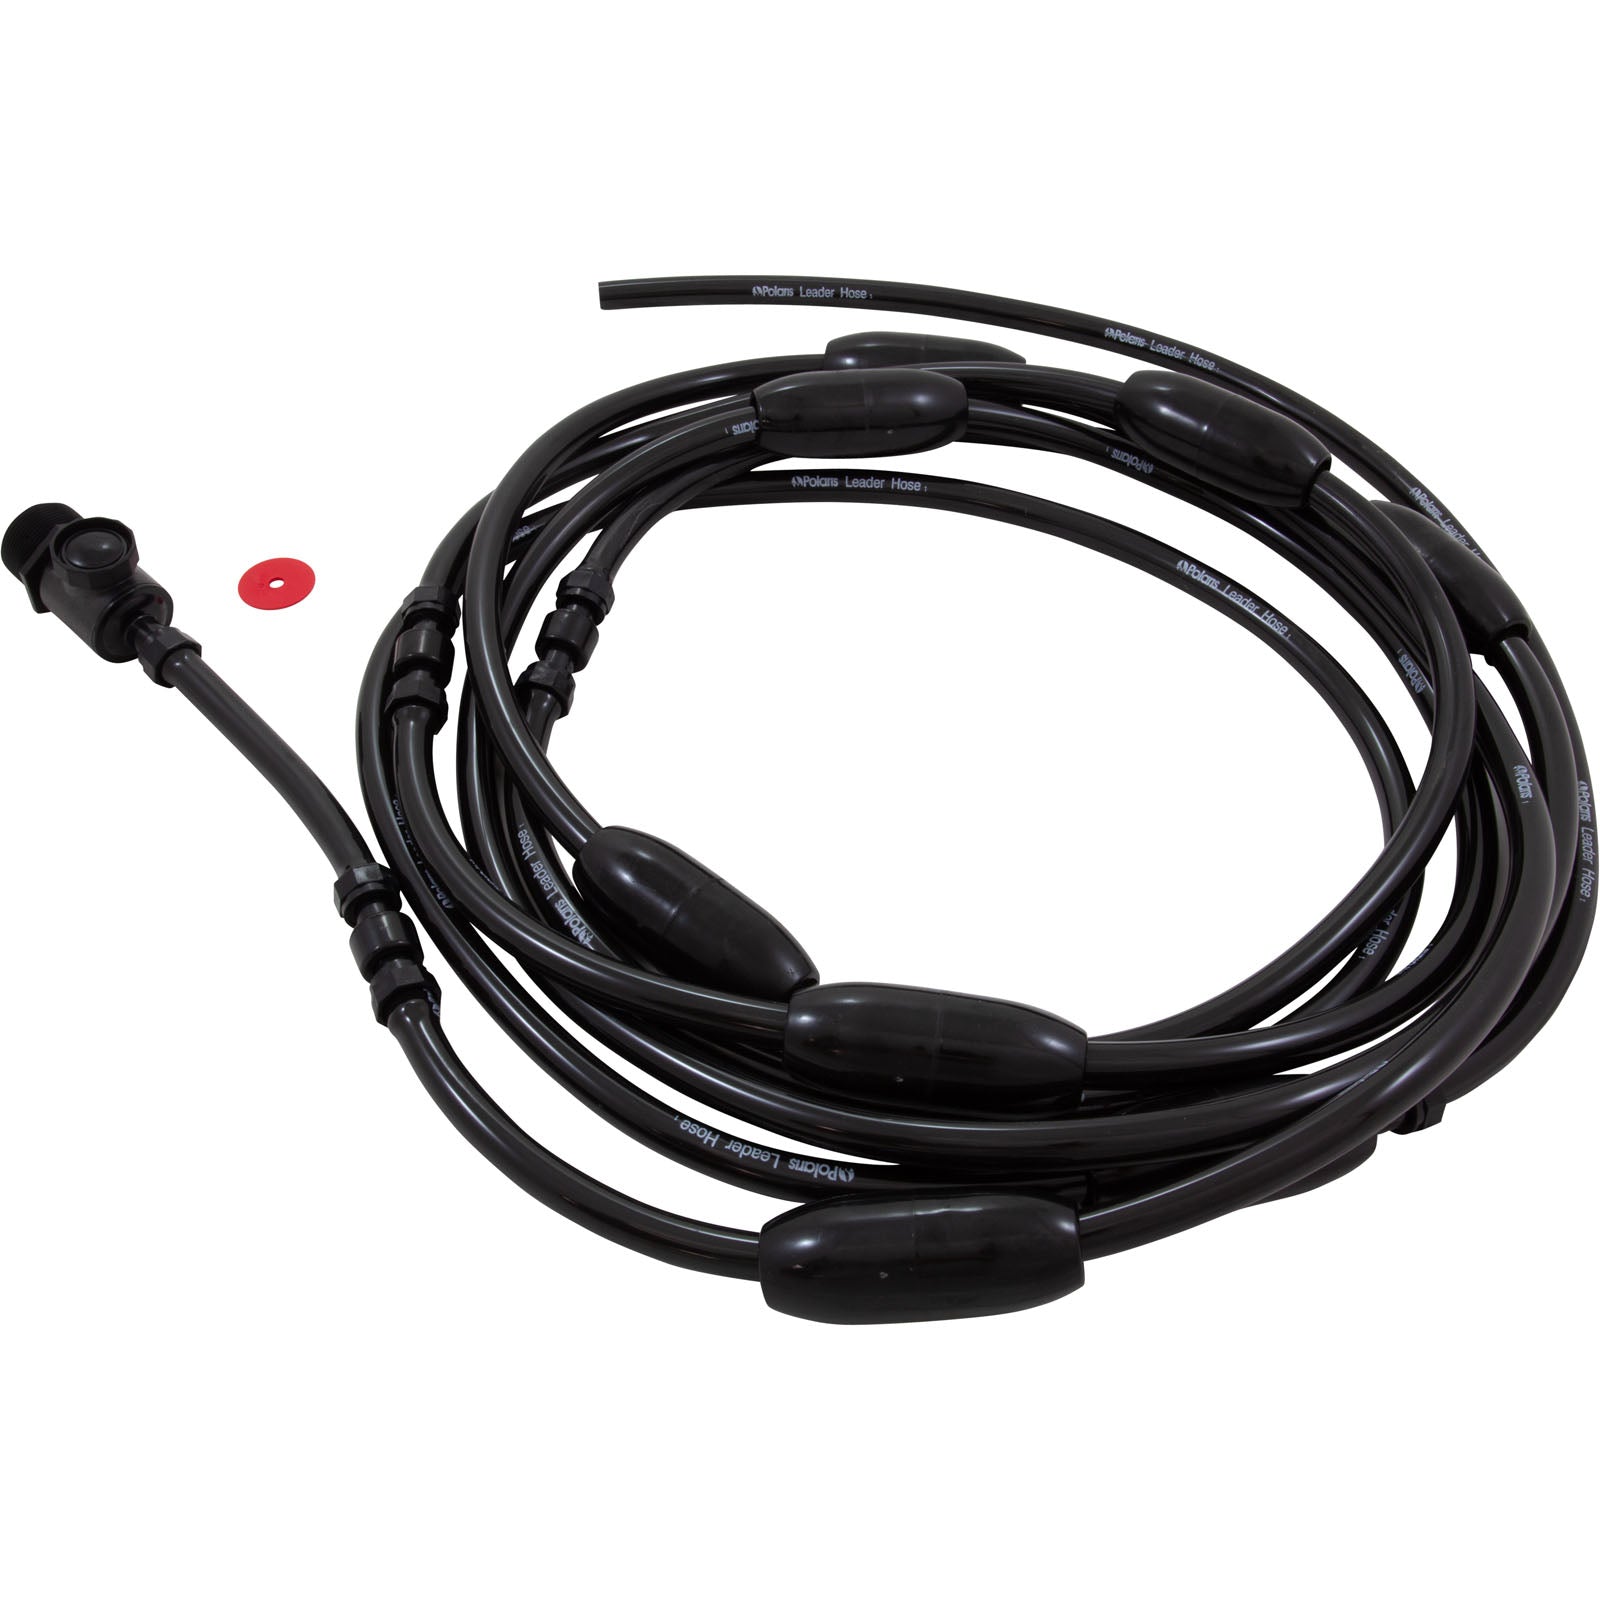 Zodiac/Polaris G6 Black Complete Feed Hose with UWF for Polaris 280/380 Pool Cleaners